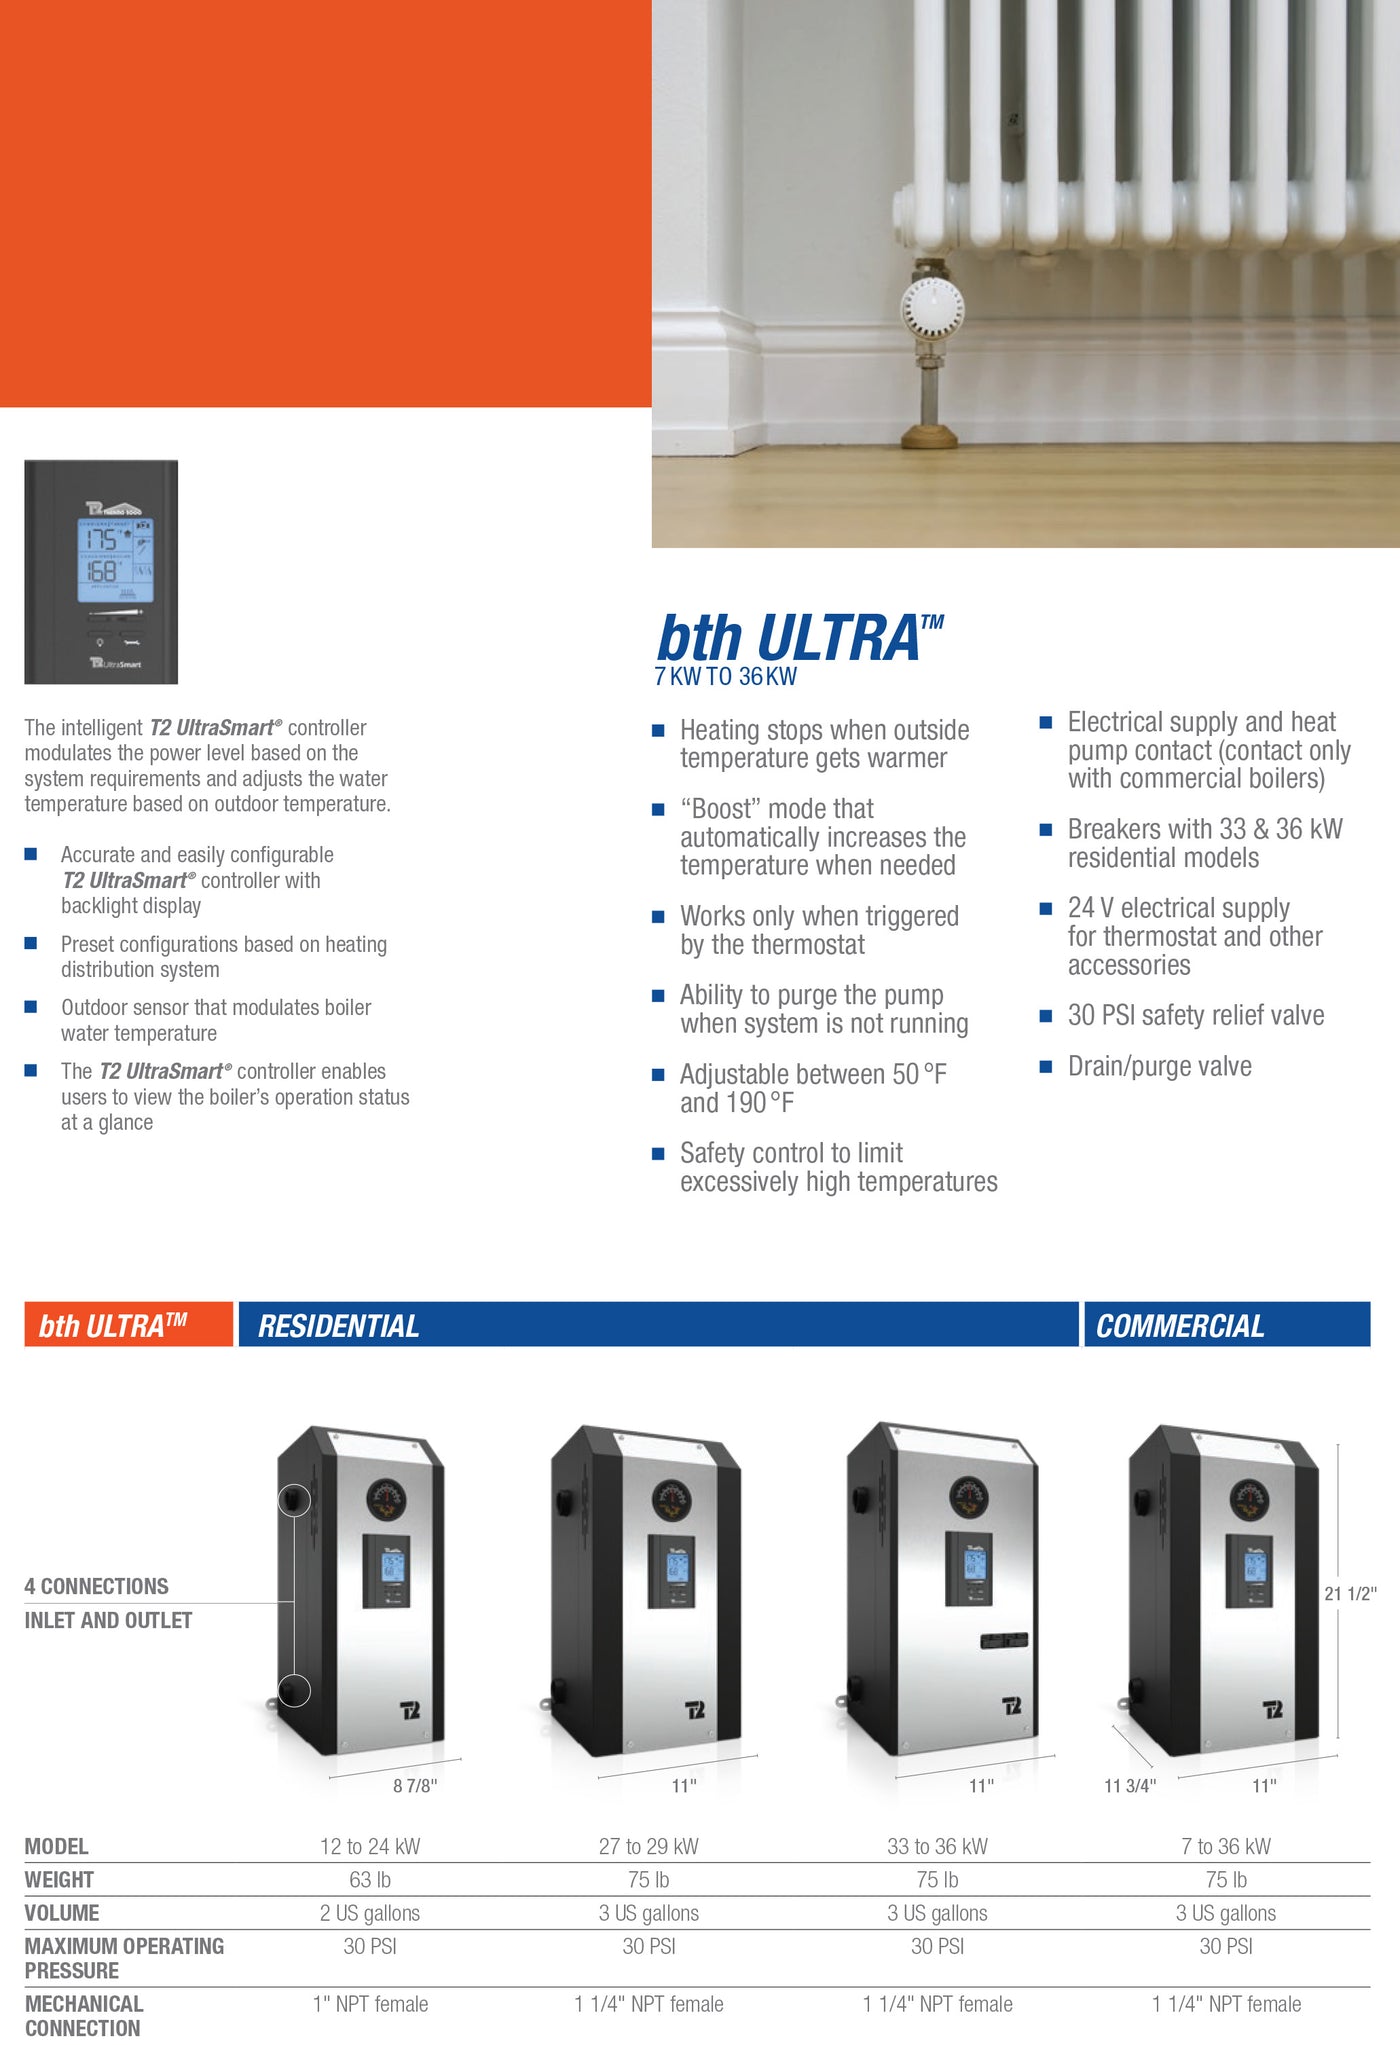 Thermo 2000 BTH Ultra Radiant Floor Electric Boiler at a glance